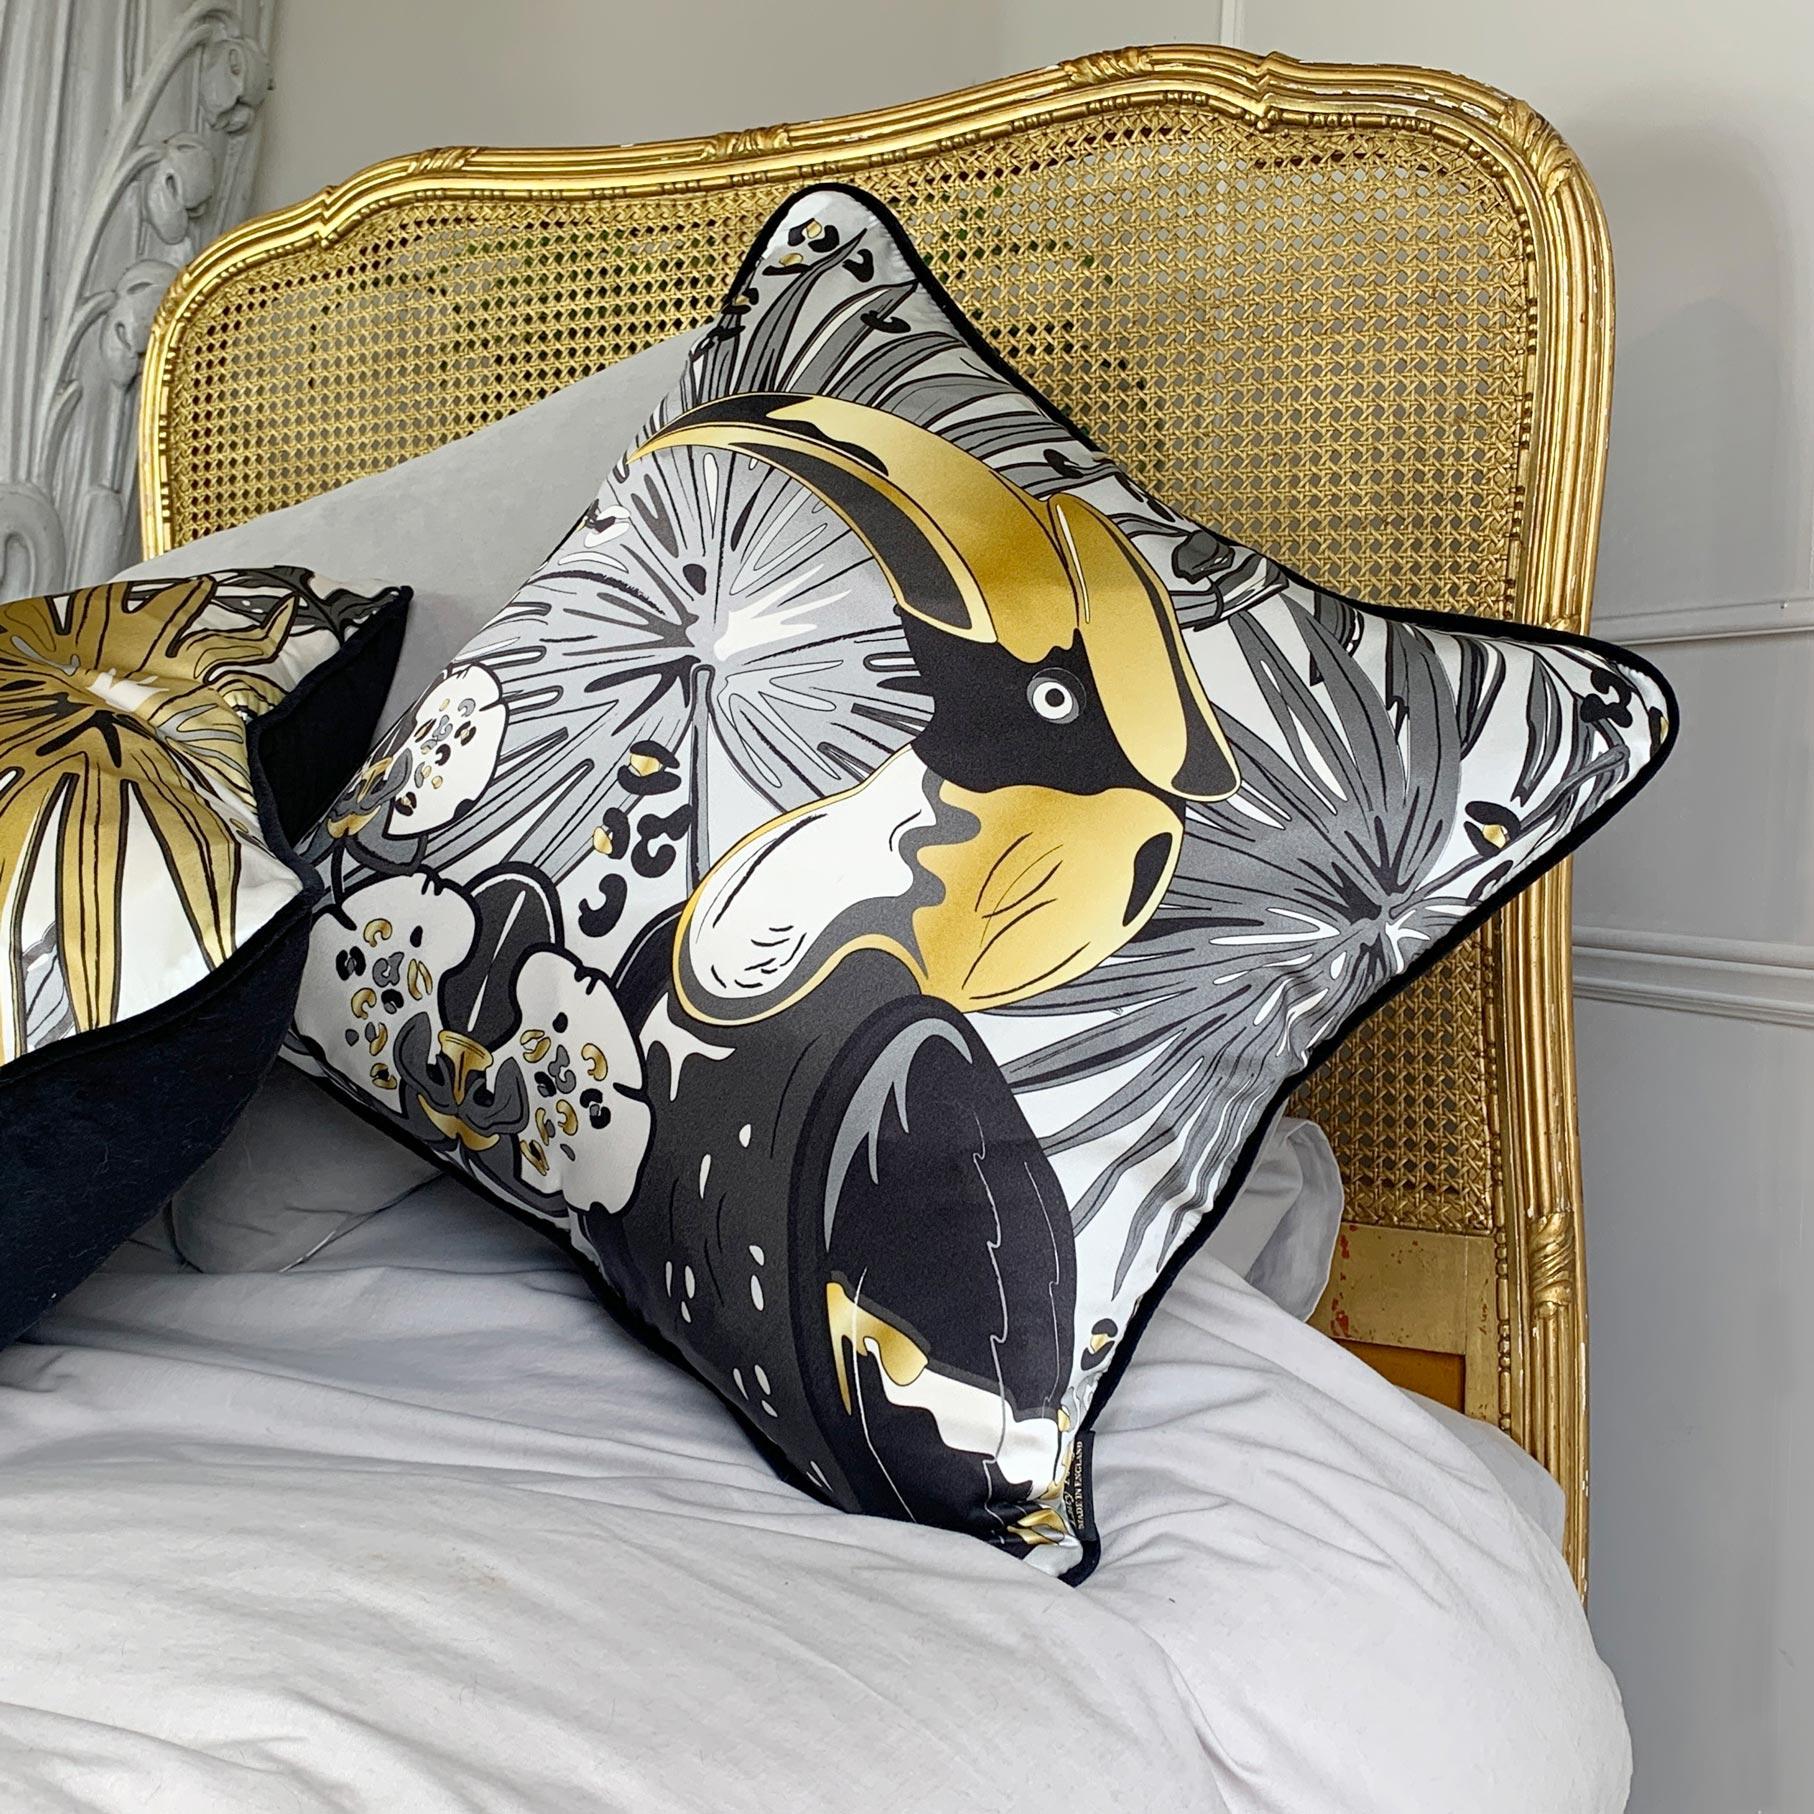 Immerse yourself in a sub-tropical paradise with the luxurious silk 'Hornbill' cushion from our Tropics range

This evocative 100% silk cushion has a rich cotton velvet back and piped edge 

Inspired by large lush jungles and the exotic birds that